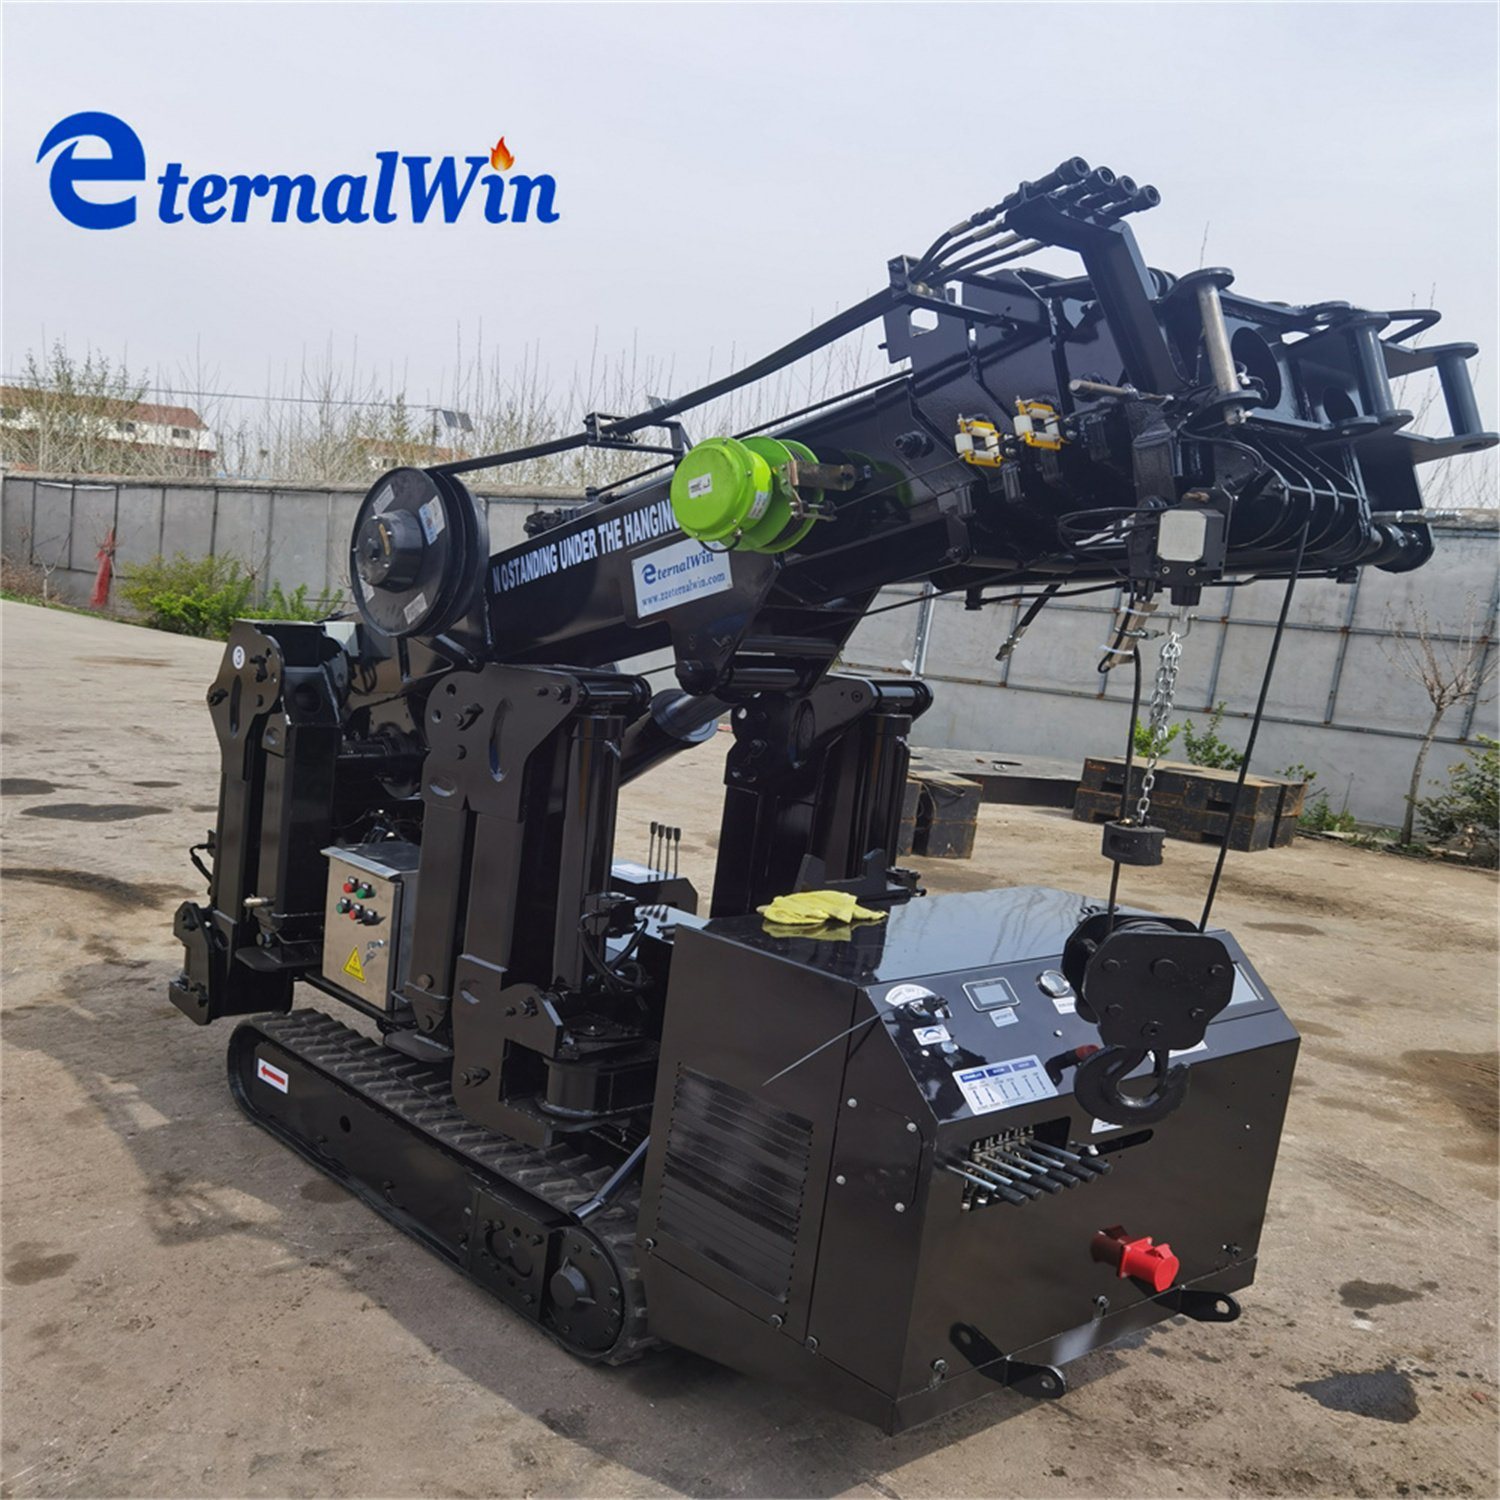 Small Mobile Electric Spider Crane for Workshop